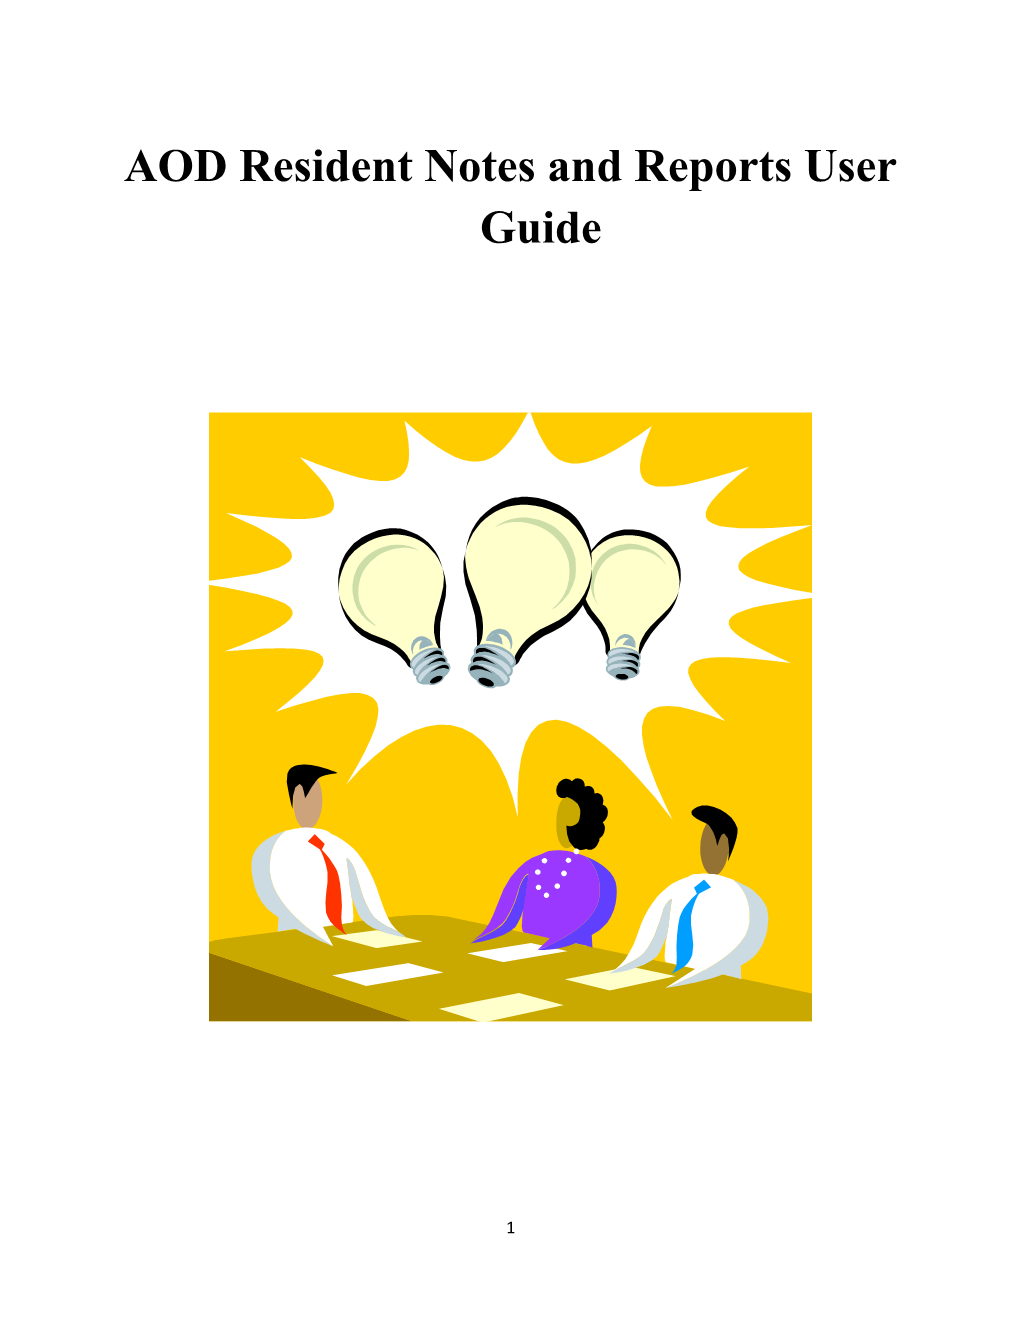 AOD Resident Notes and Reportsuser Guide